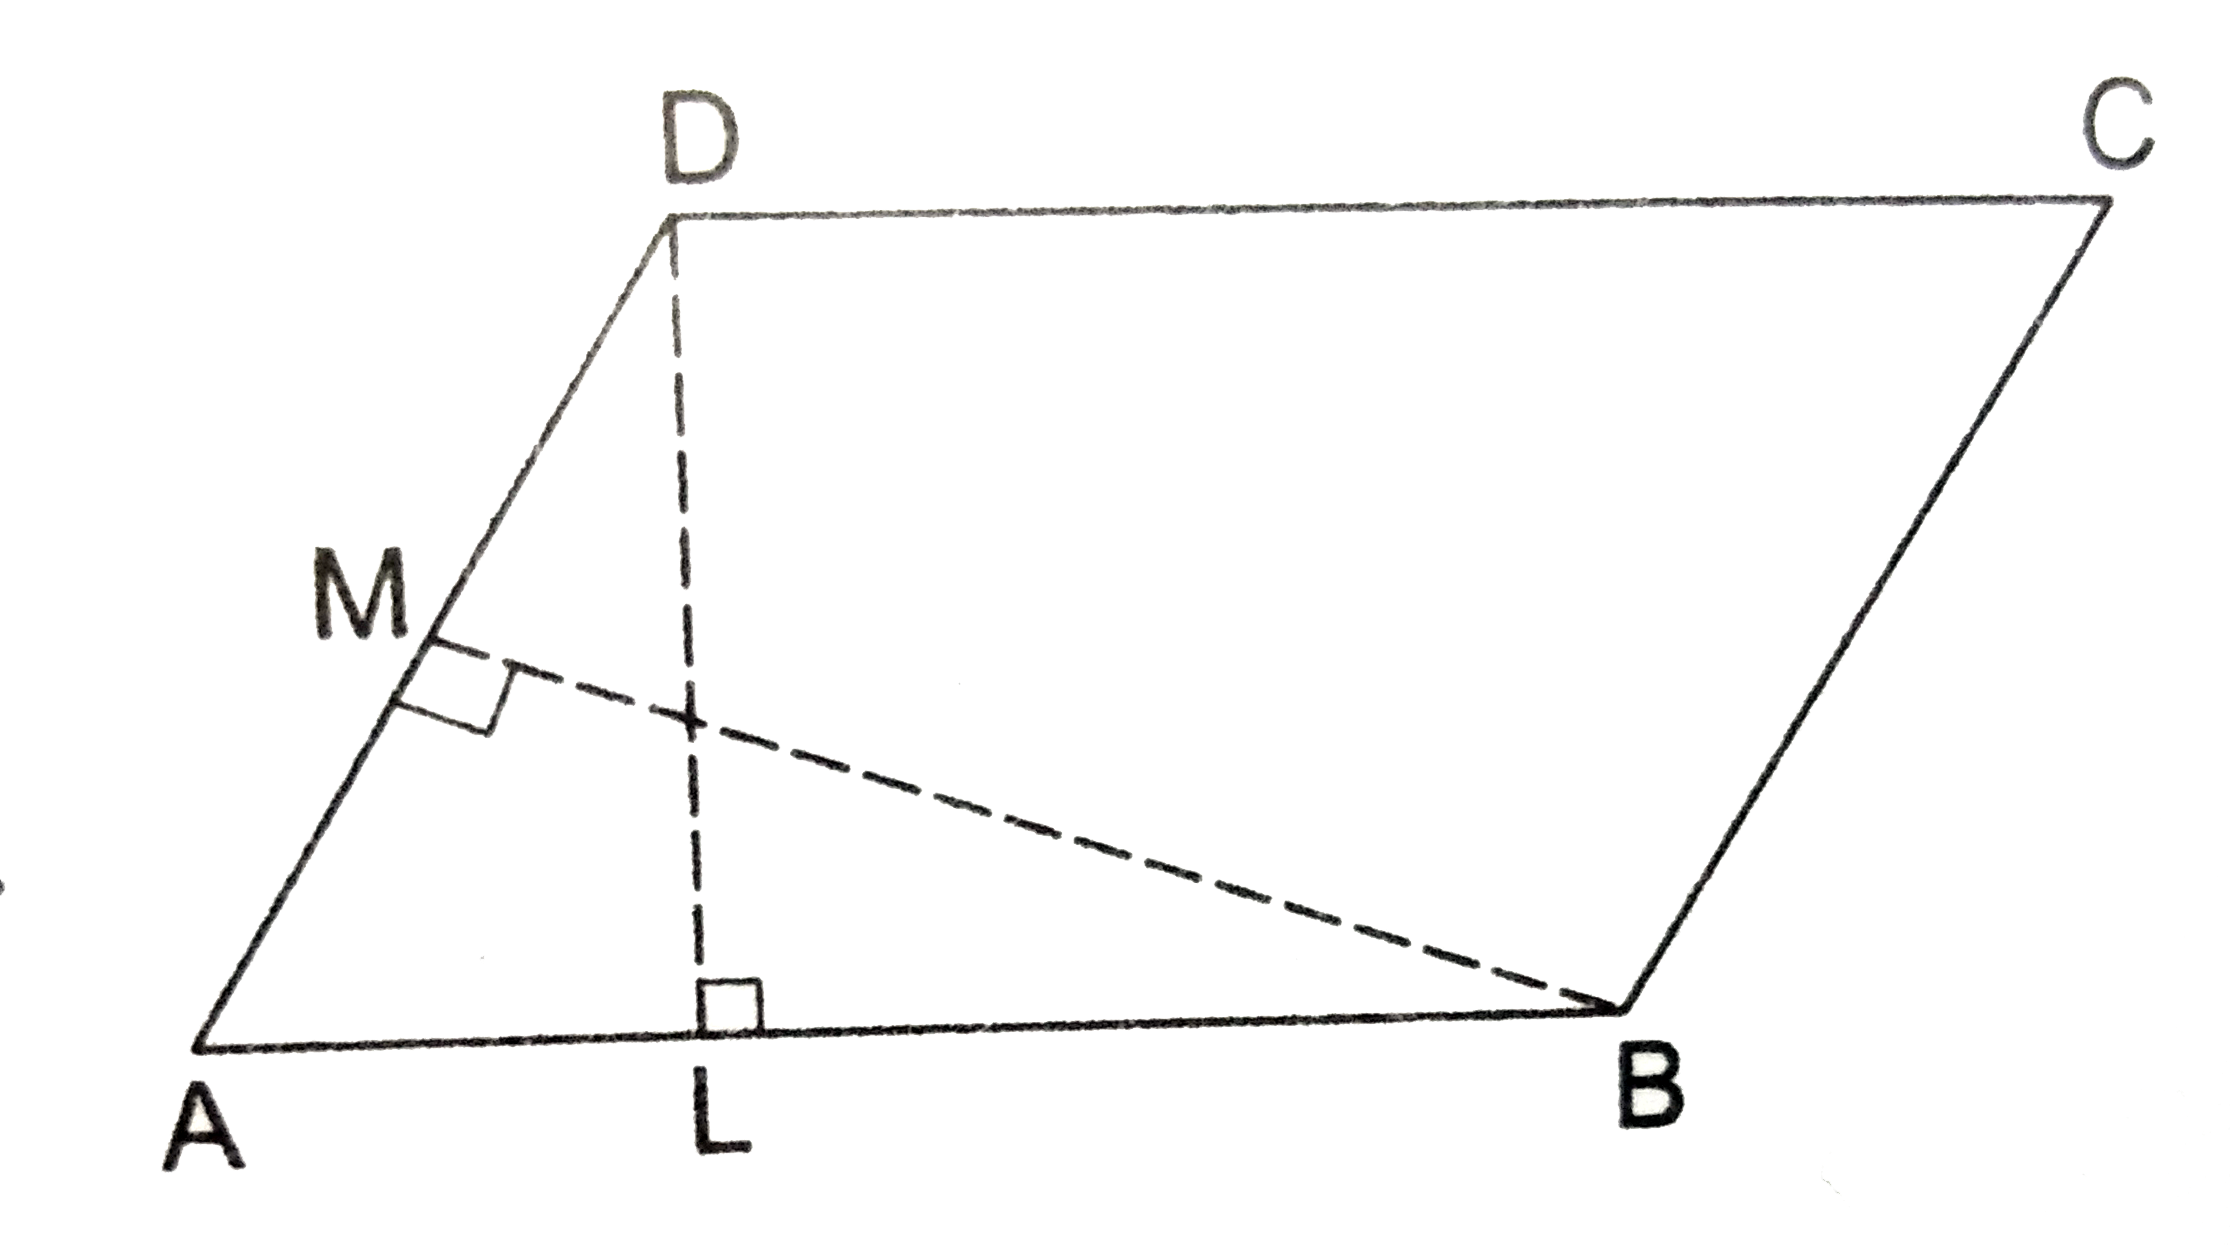 In a parallelogram ABCD, it is being given that AB = 10 cm and the altitudes corresponding to the sides AB and AD are DL = 6 cm  and BM = 8 cm, respectively. Find AD.